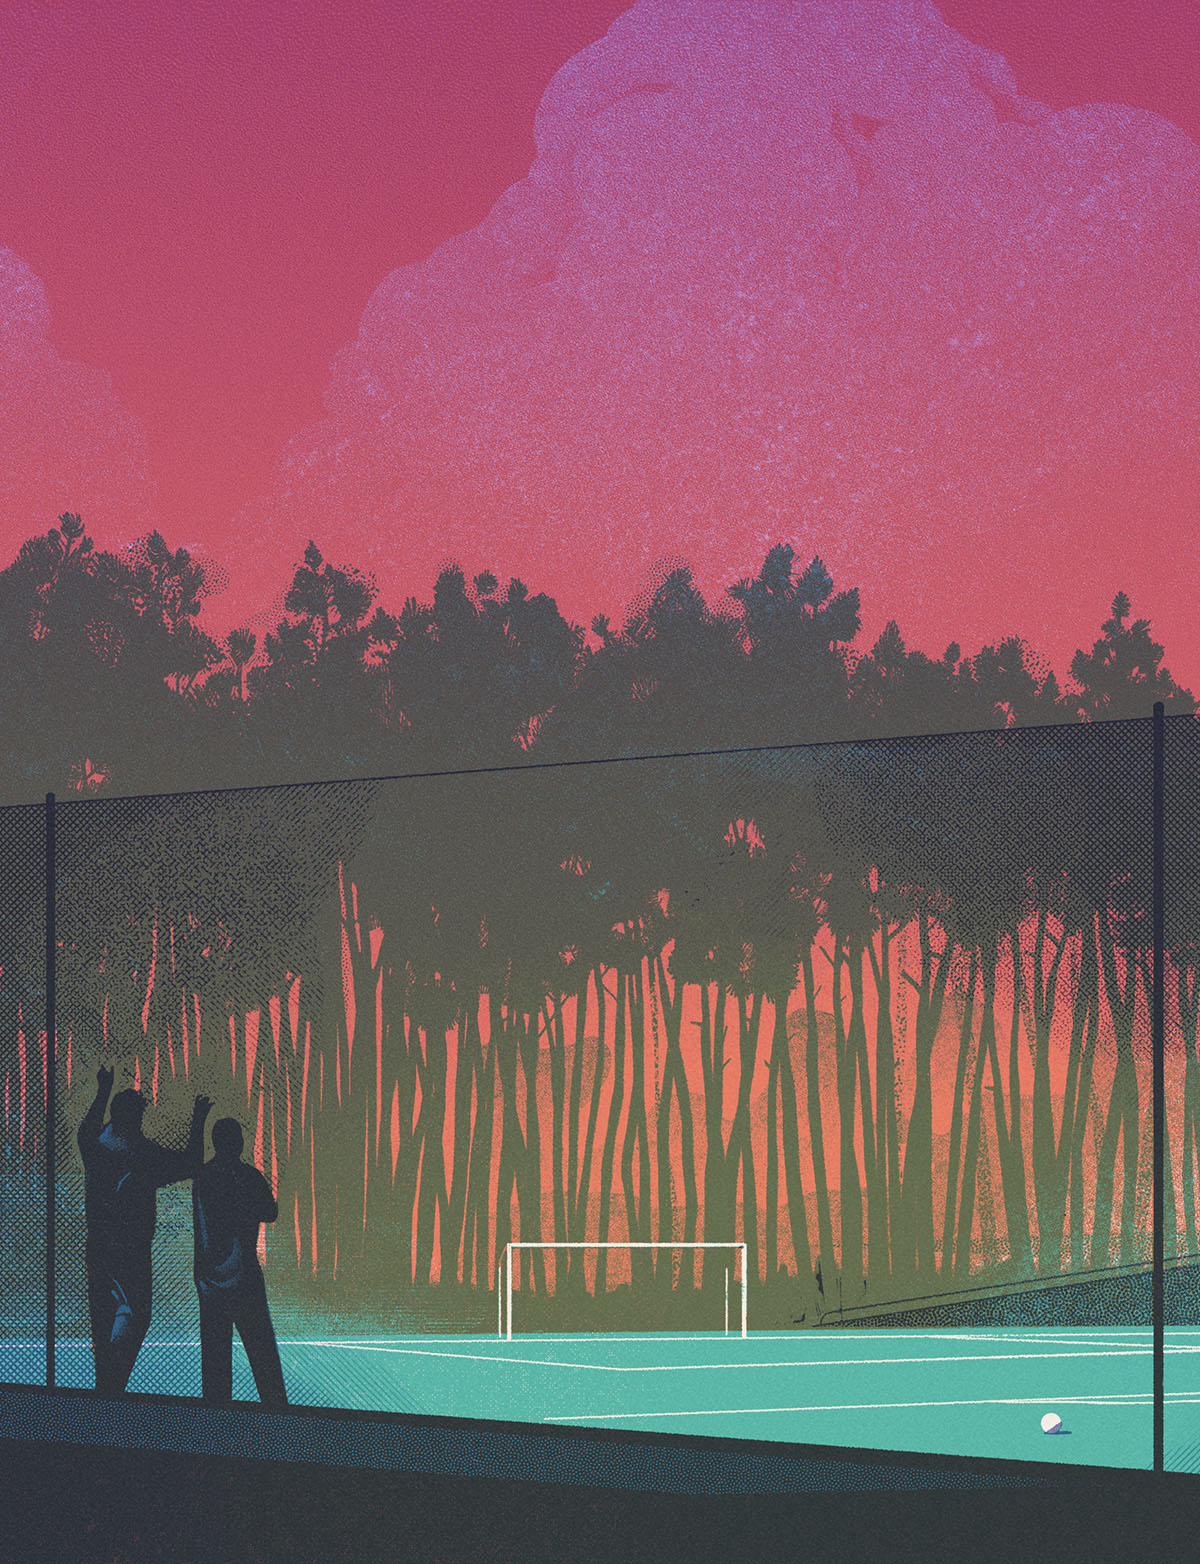 An illustration of two people standing next to a soccer field surrounded by trees